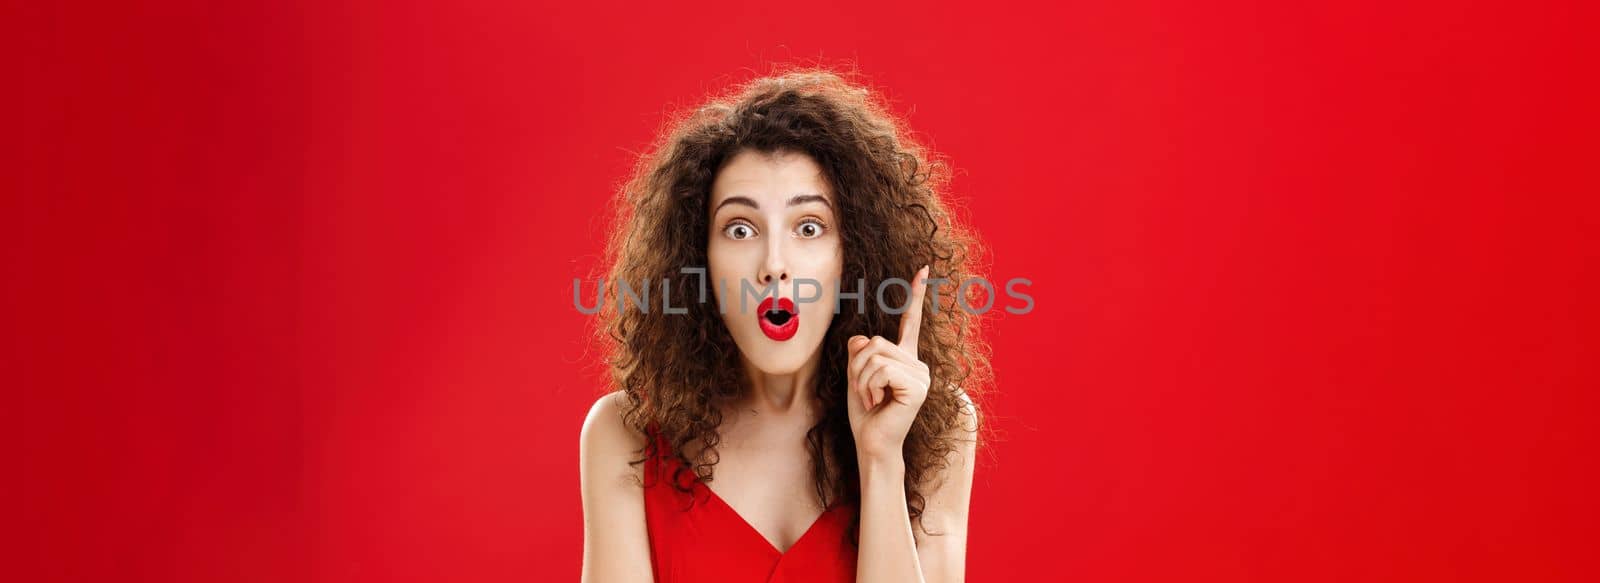 Woman remembered important information feeling excited adding suggestion with raised index finger in eureka gesture, folding lips in raising eyebrows being thrilled finally understanding by Benzoix